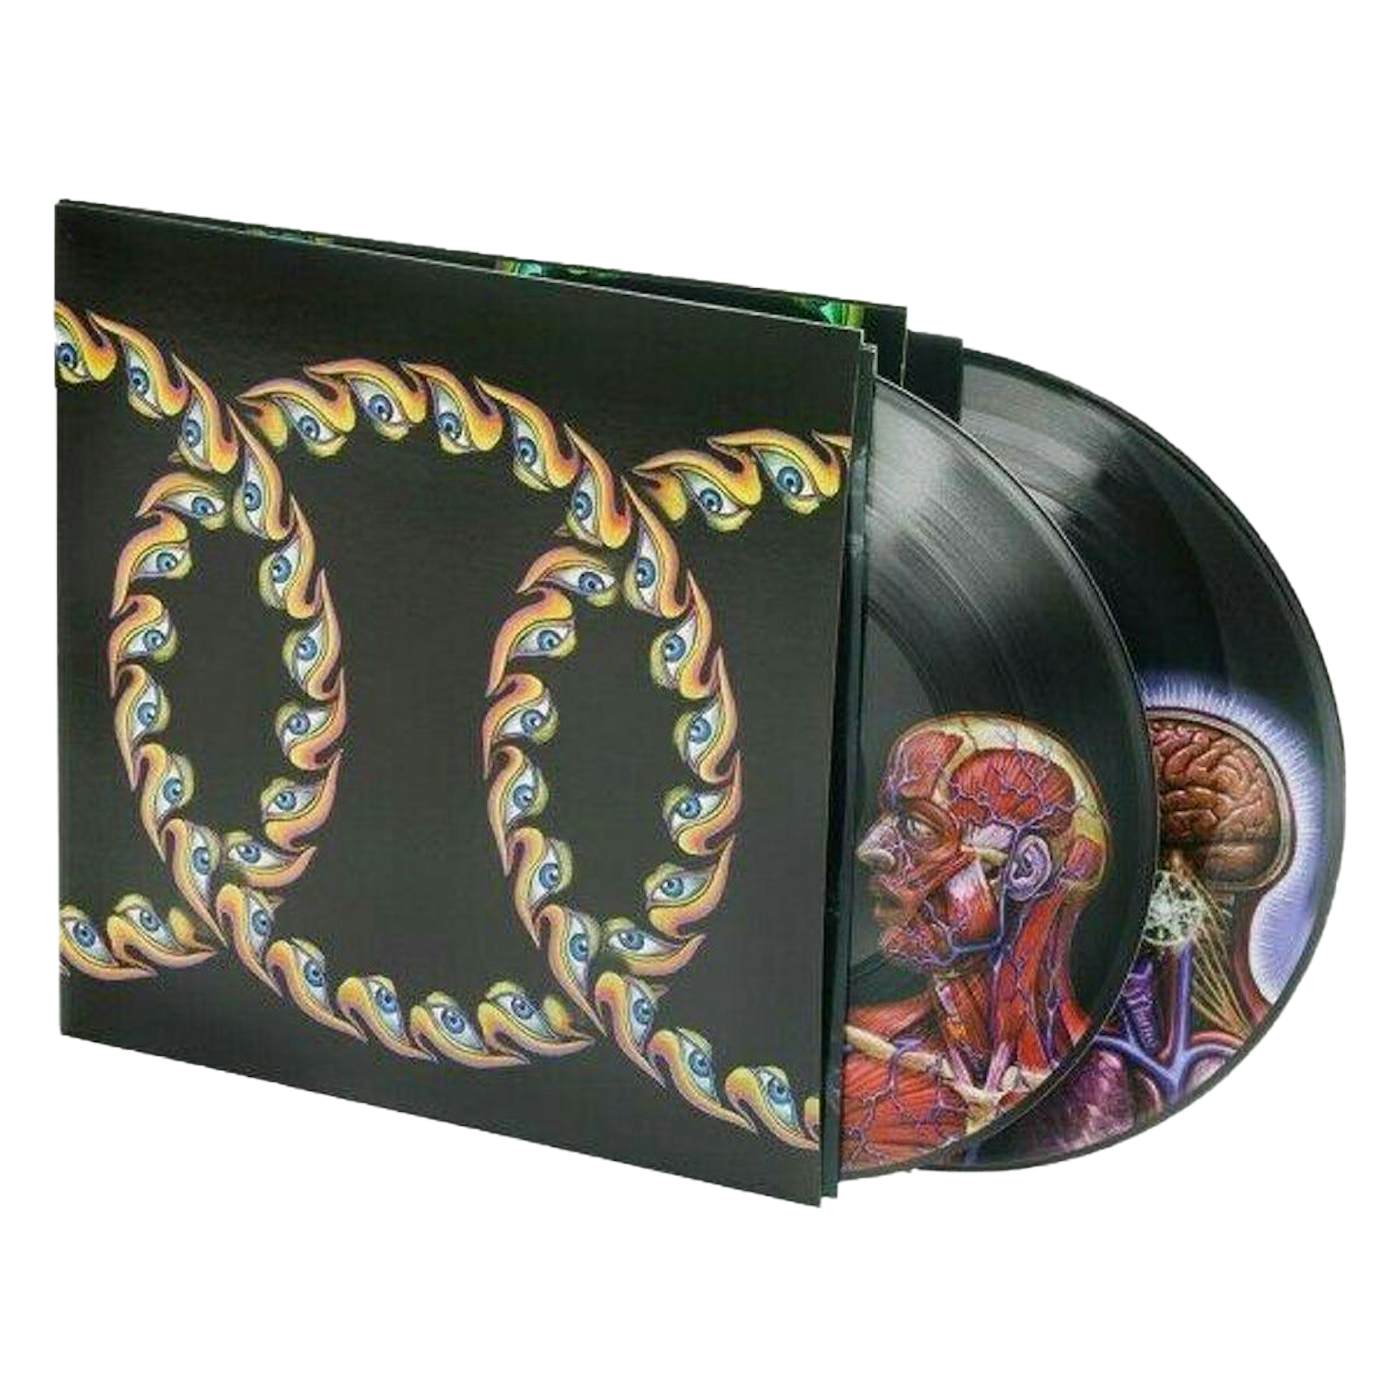 kalligrafi besøgende Tumult TOOL Lateralus (2LP/Limited Edition Picture Disc) Vinyl Record